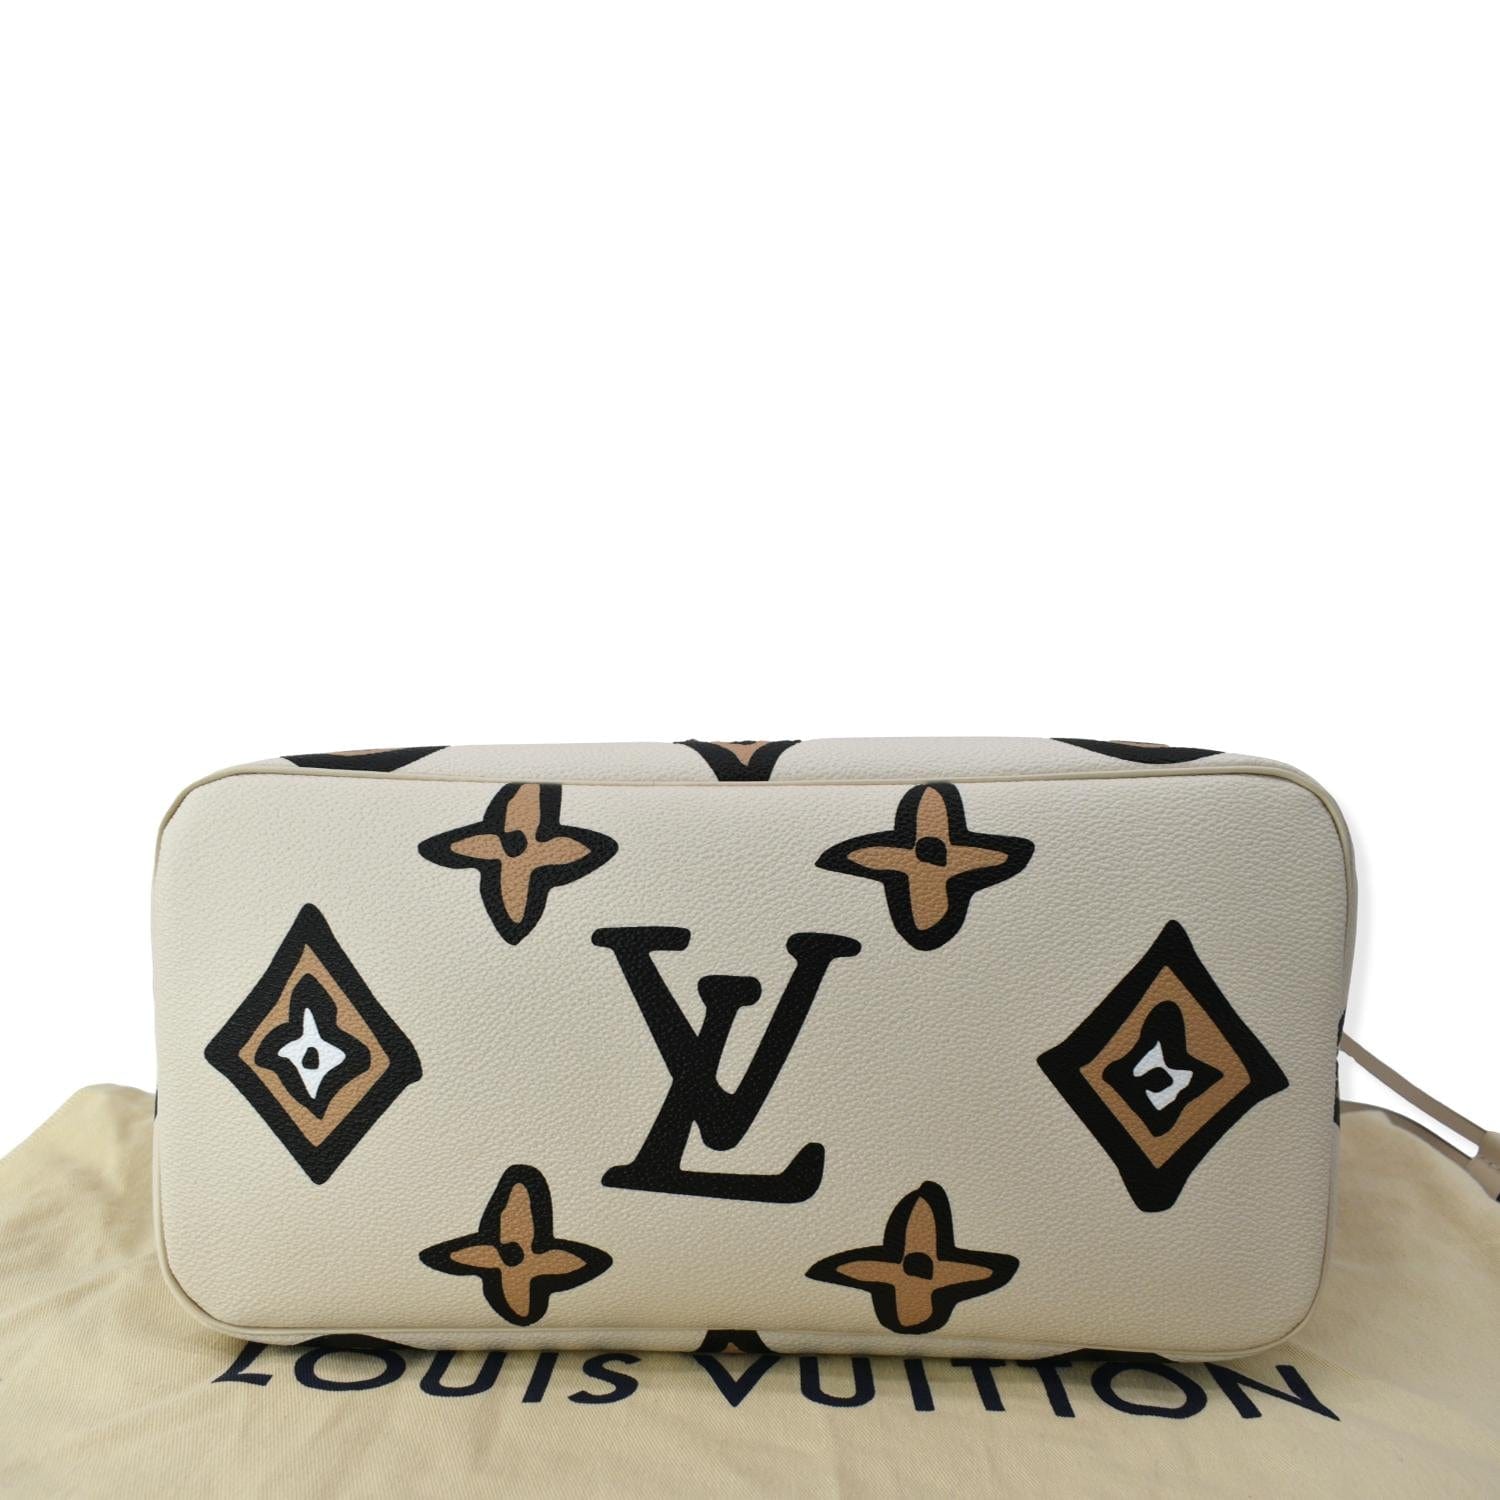 🍀LOUIS VUITTON Wild At Heart Neverfull MM Creme Black Tote Shoulder Bag  LIMITED